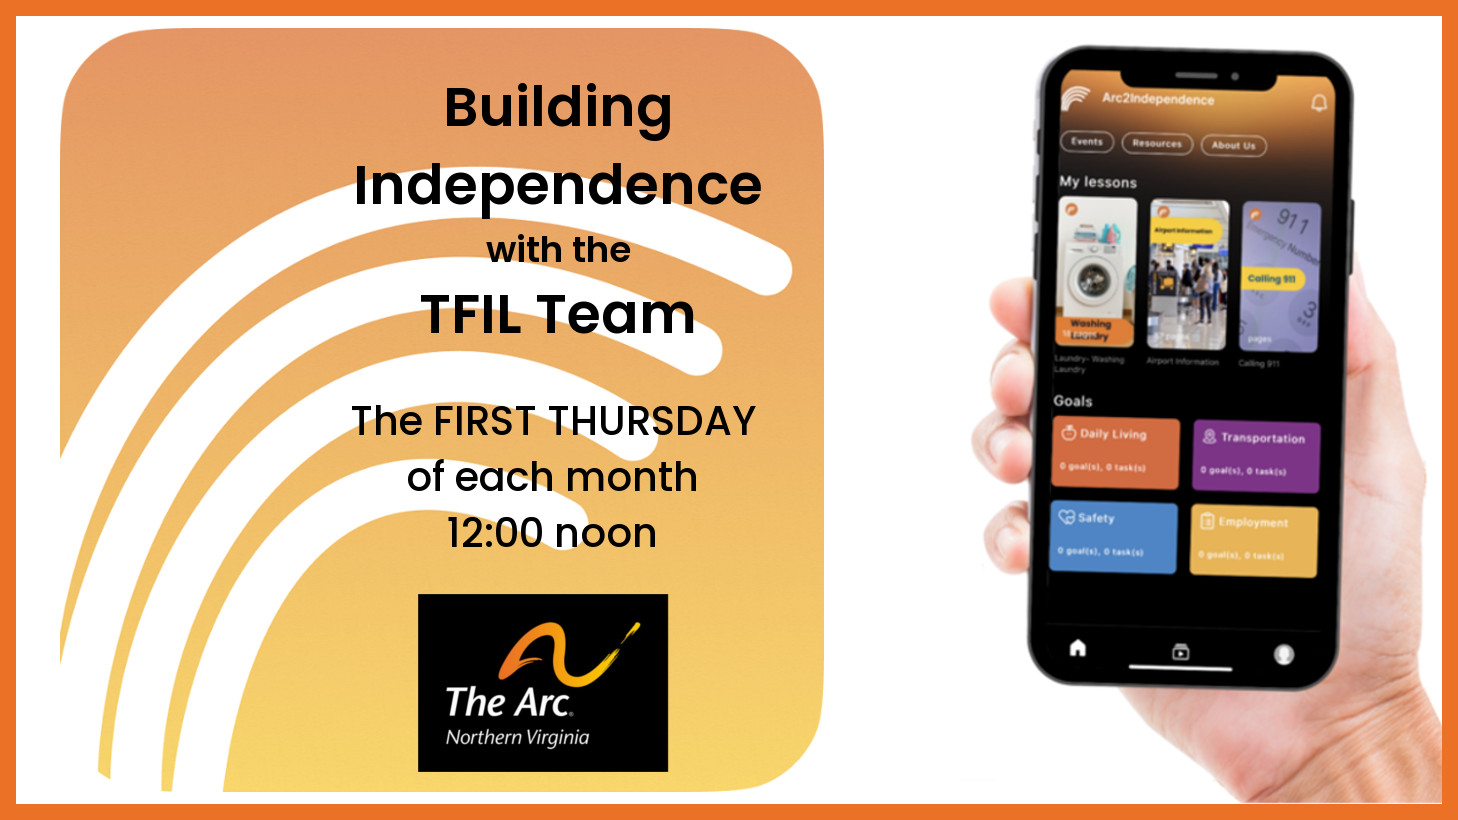 promo image for the Building Independence workshops features a hand holding a smartphone, with the Arc 2 Independence app on the screen.